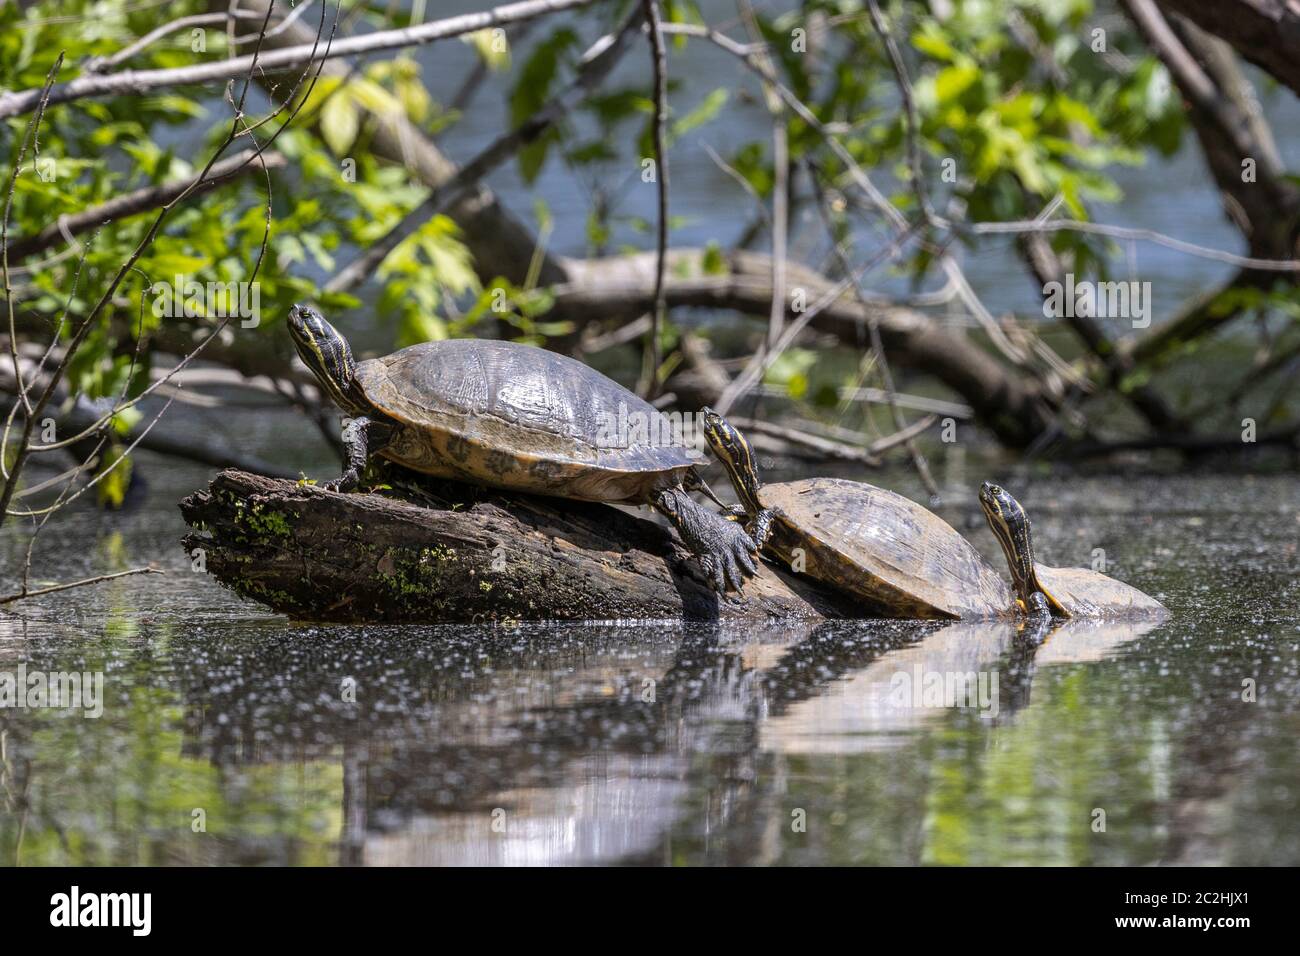 Cooter turtles, Eastwood Lake, Chapel Hill, NC Stock Photo